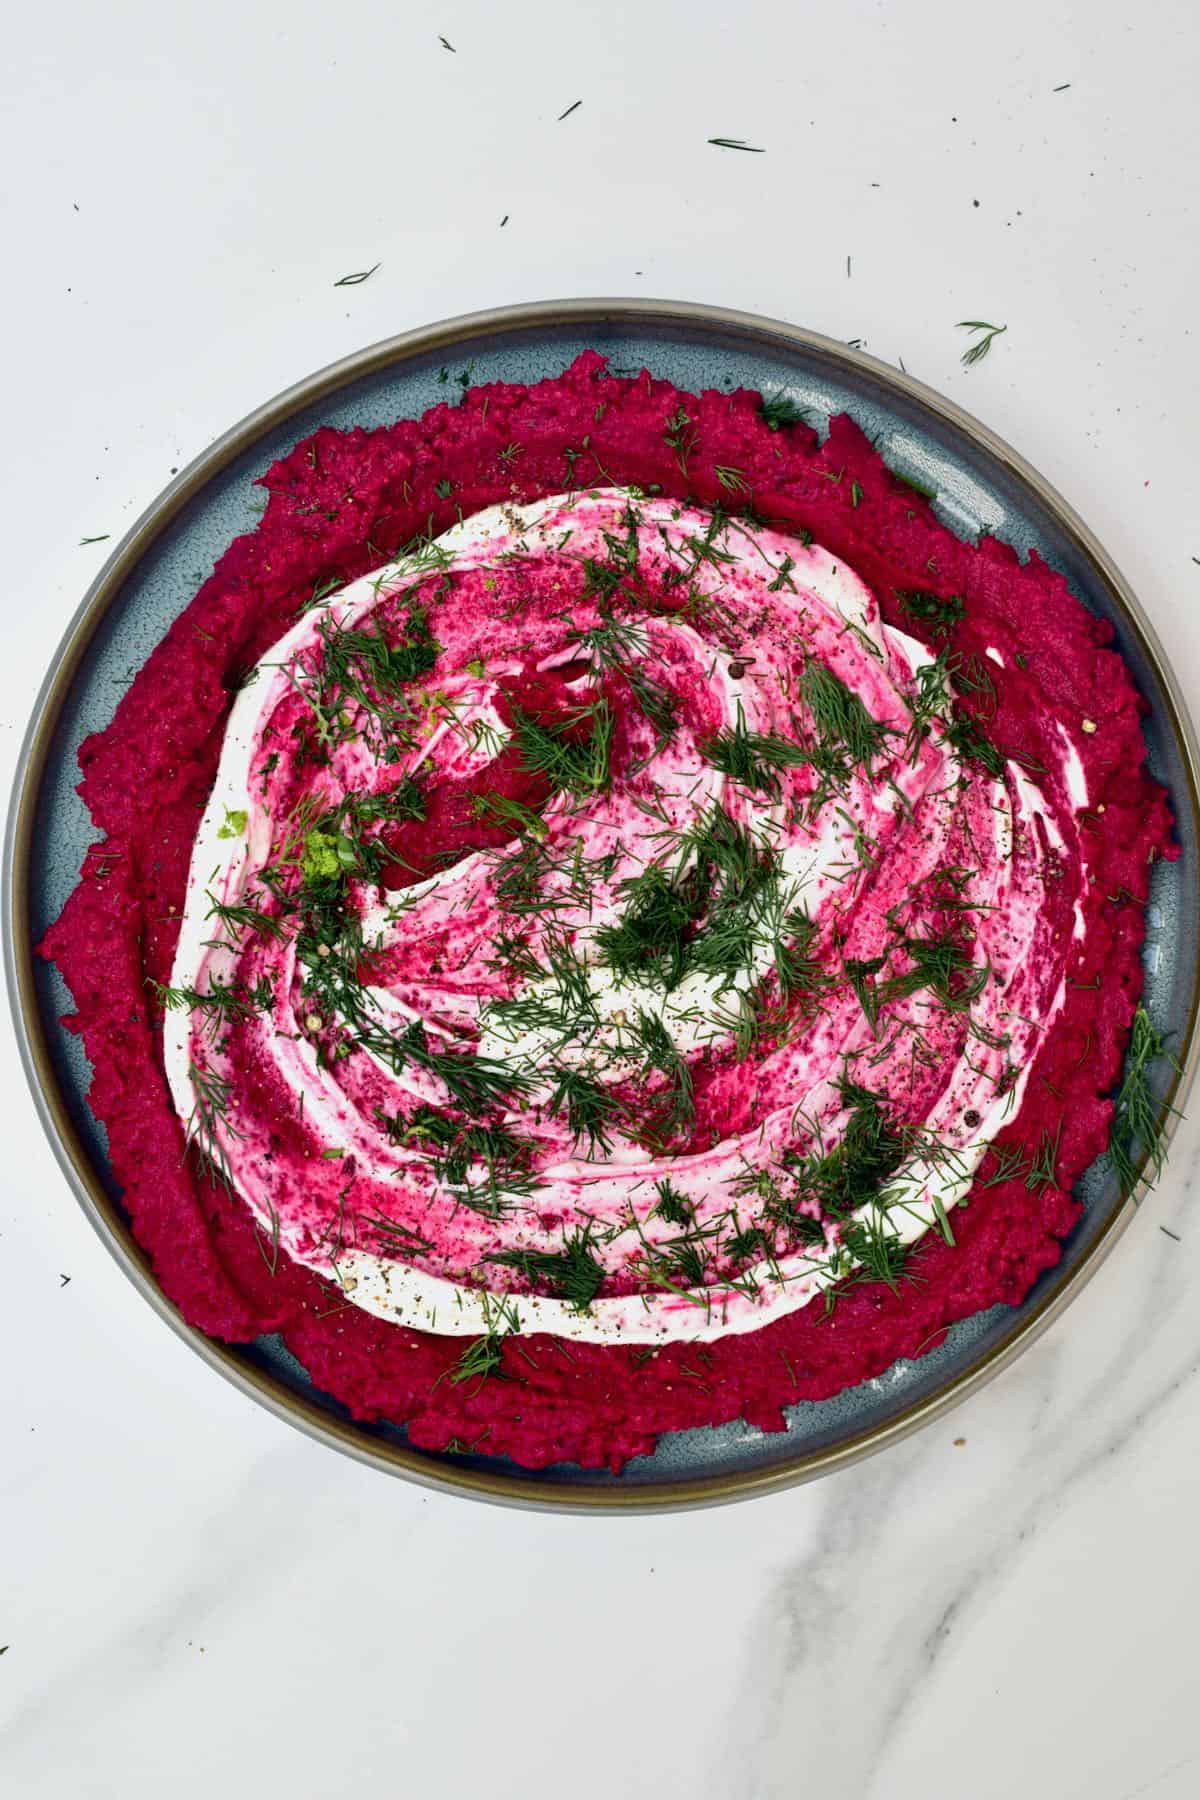 Beetroot hummus topped with dill and whipped cheese